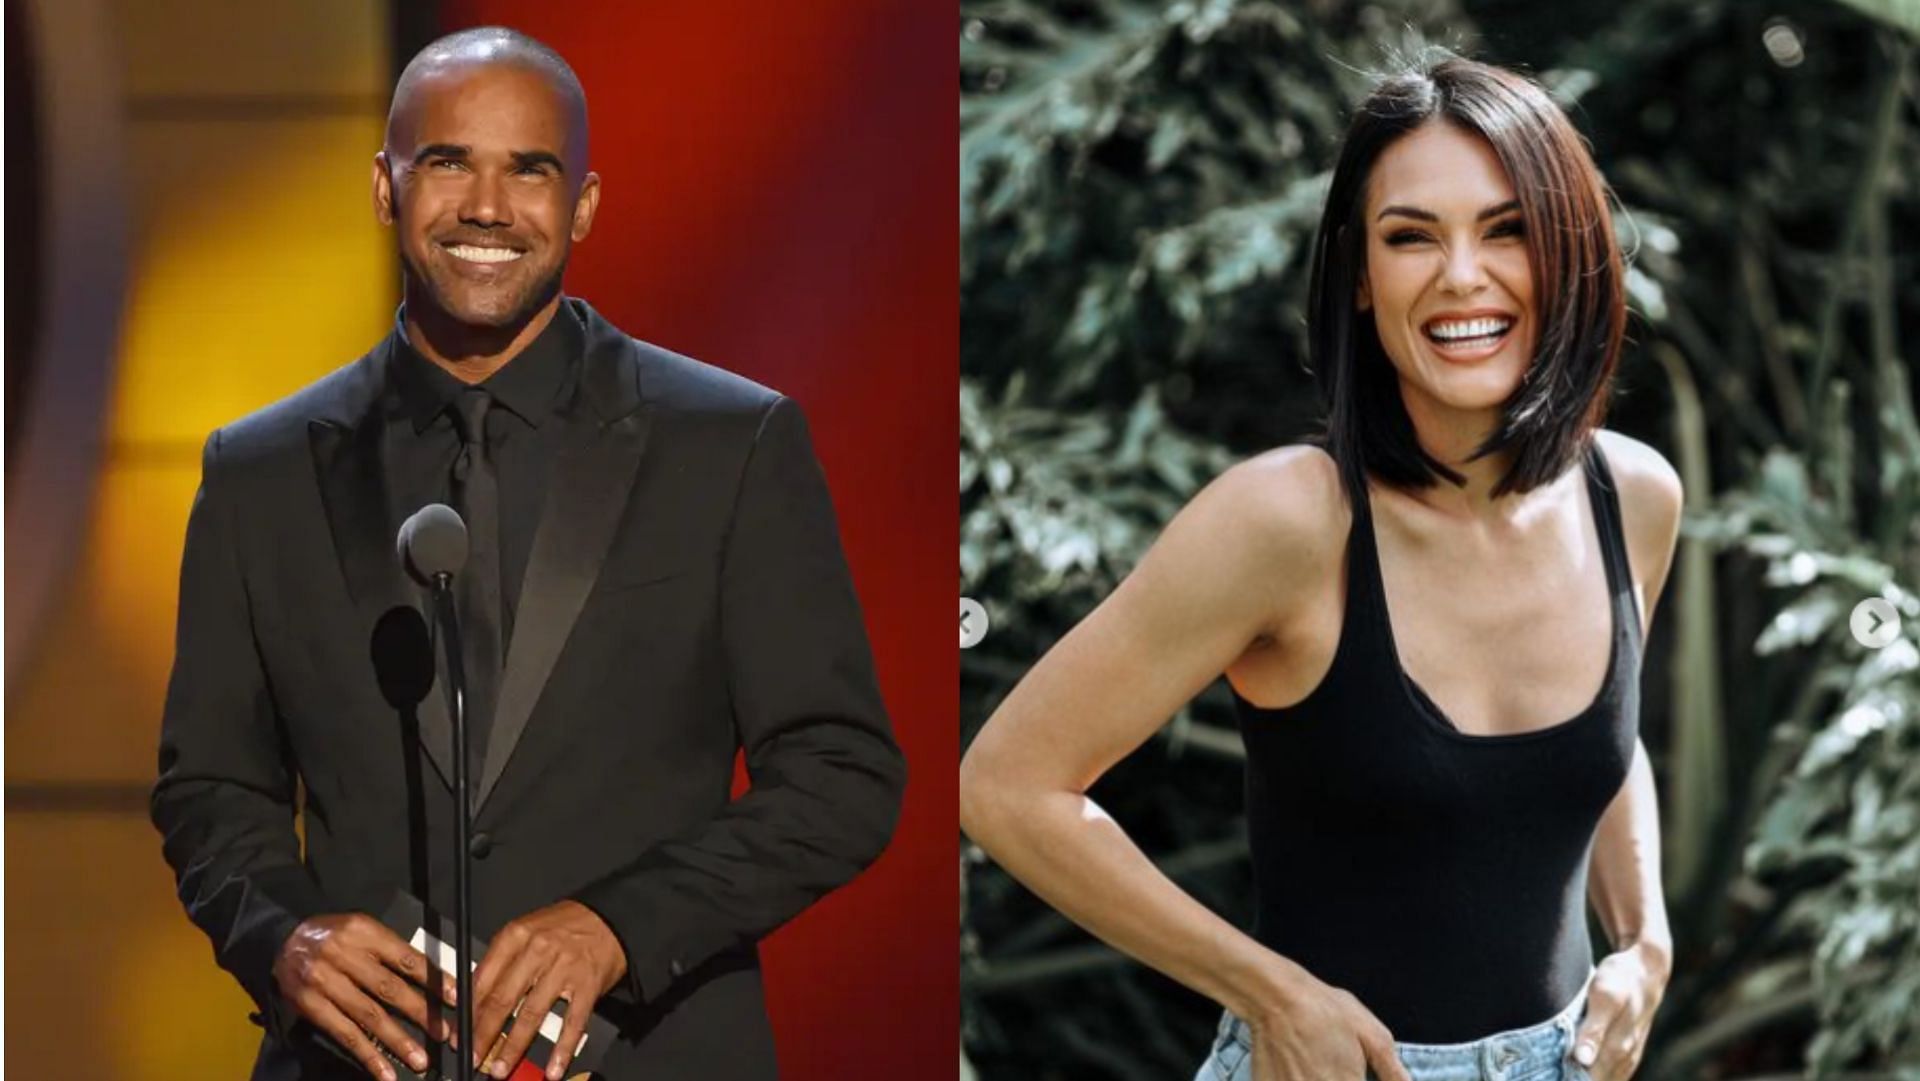 Shemar Moore welcomes baby girl with girlfriend Jesiree Dizon. Netizens pour congratulations on the pair. (Image via AP, Instagram/@jesiree)